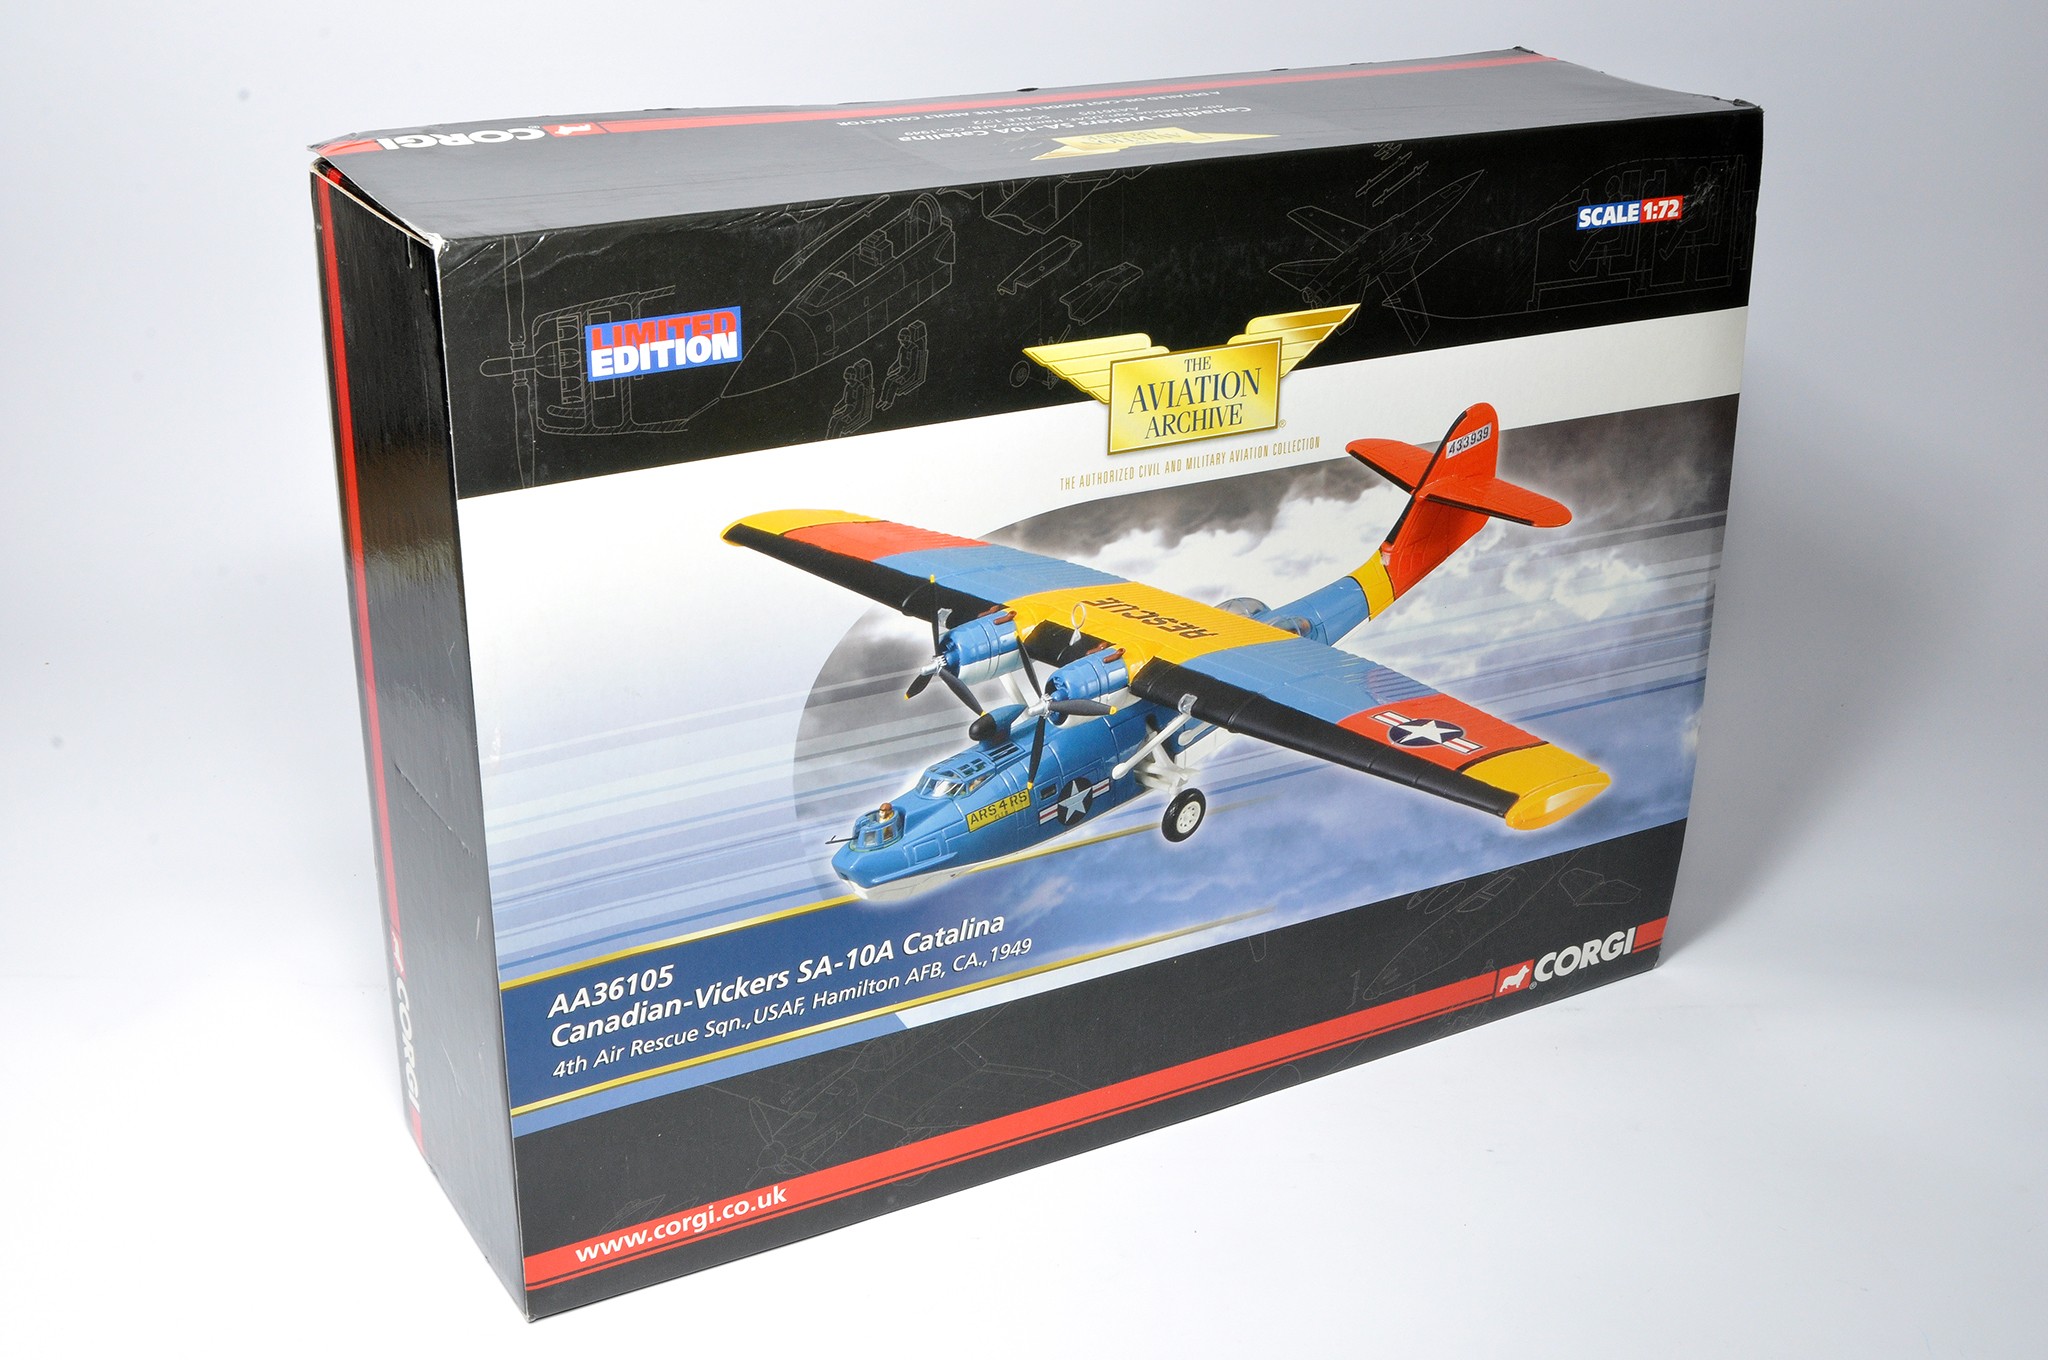 Corgi 1/72 diecast model aircraft issue comprising No. AA36105 Canadian Catalina. Looks to be